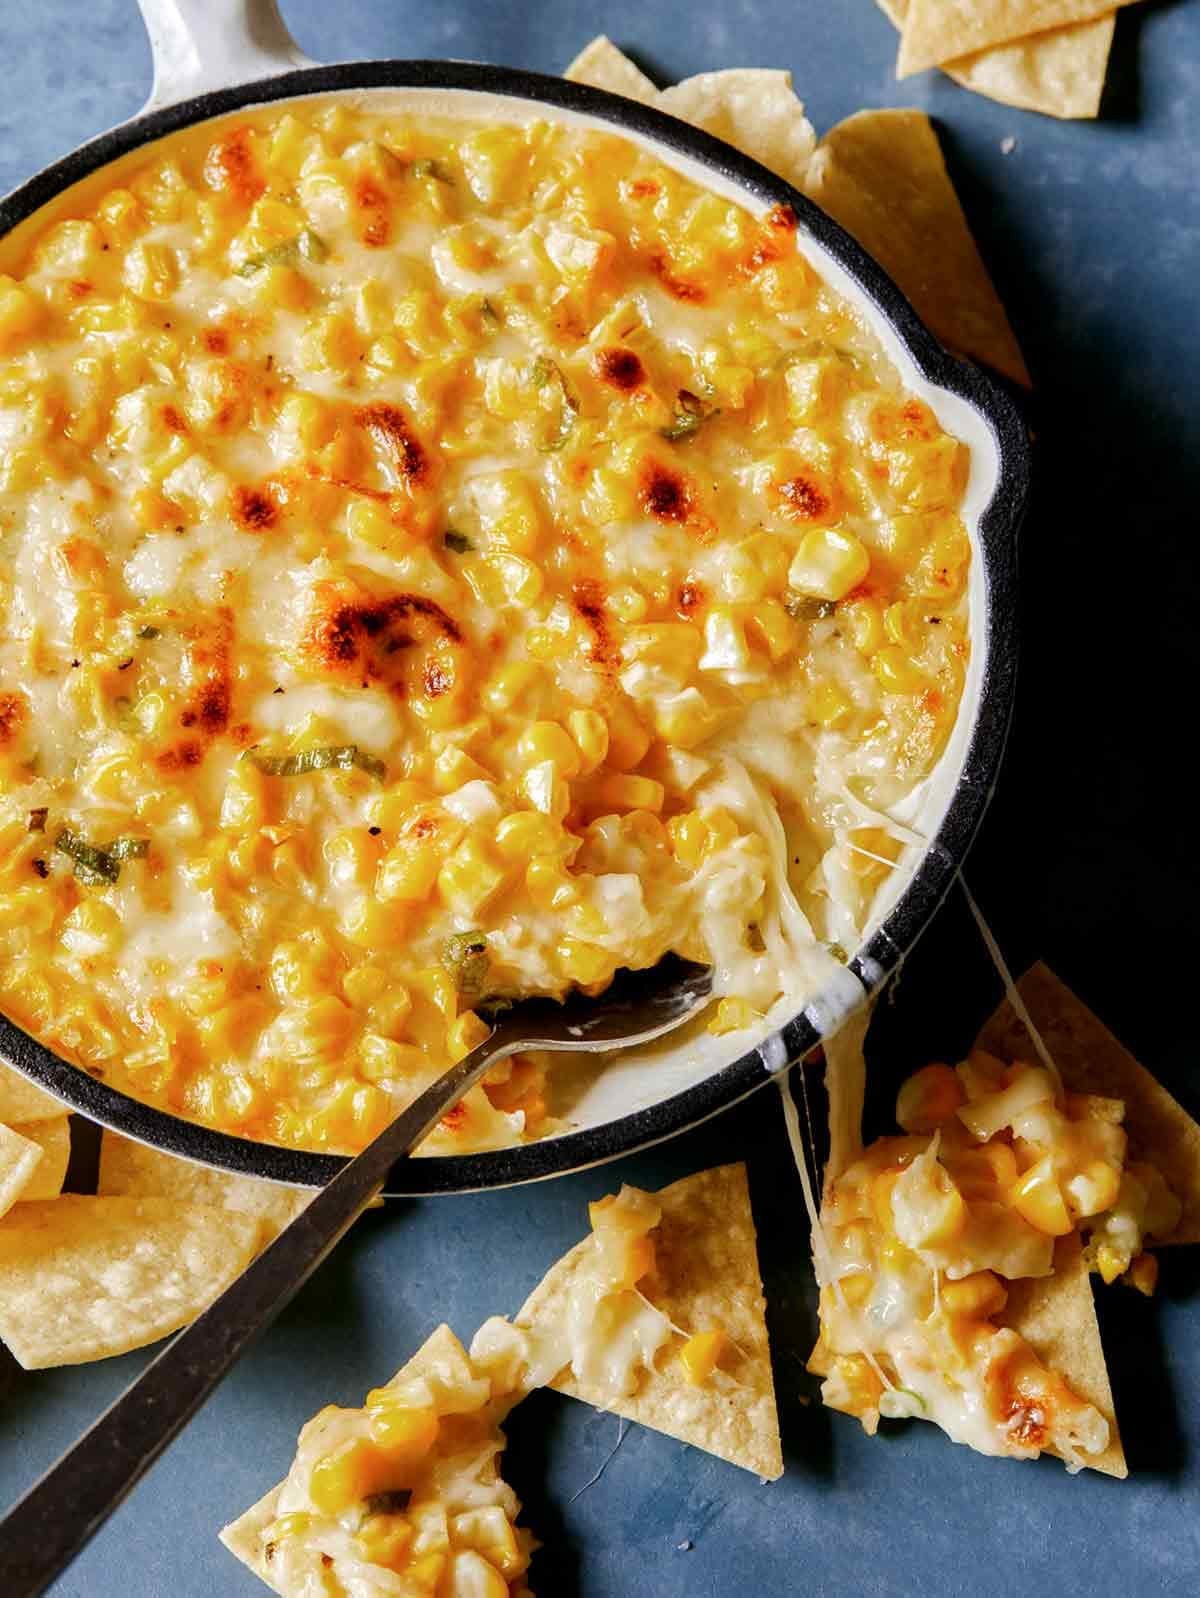 Corn and cheese dip in skillet.